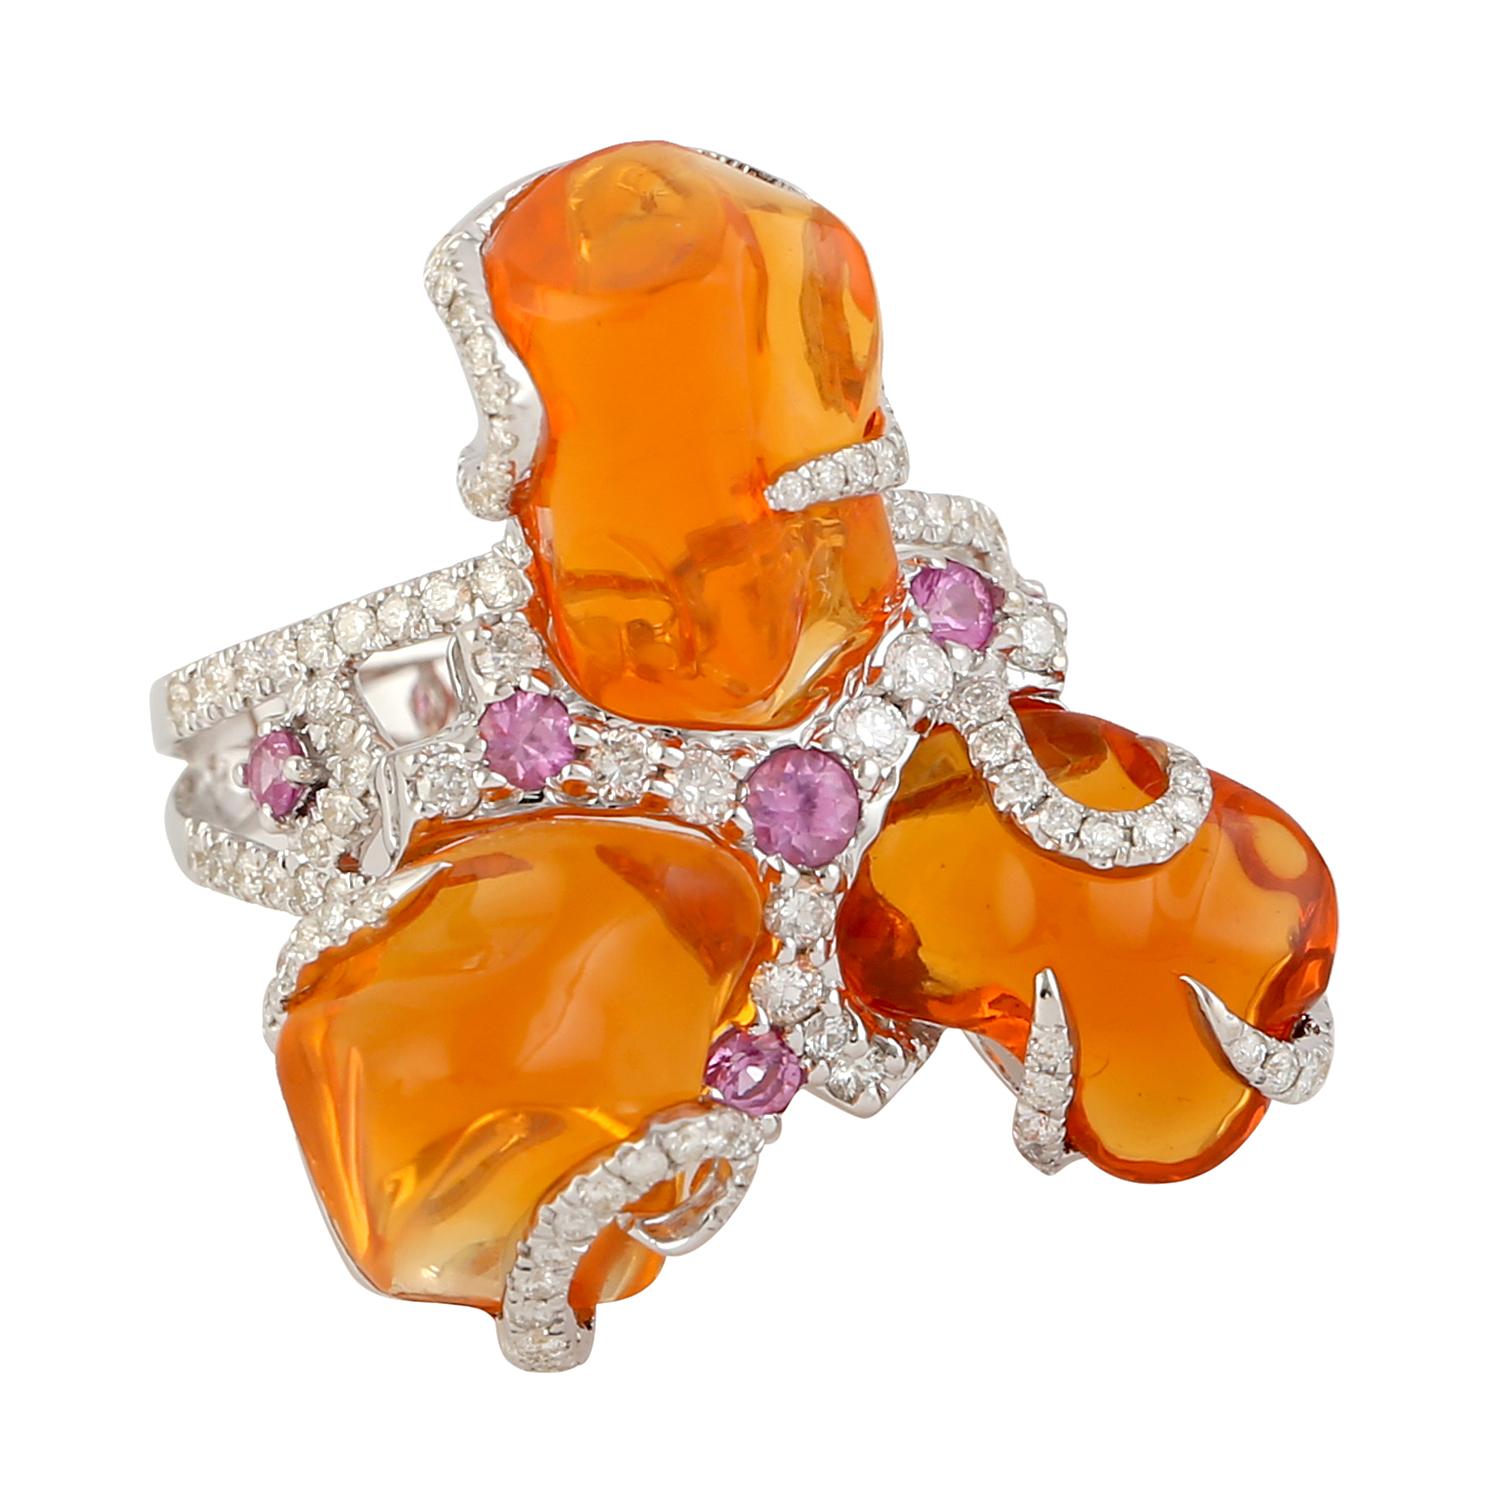 Women's 3 Stone Fire Opal Ring Equipped With Sapphire & Diamonds In 18k White Gold For Sale